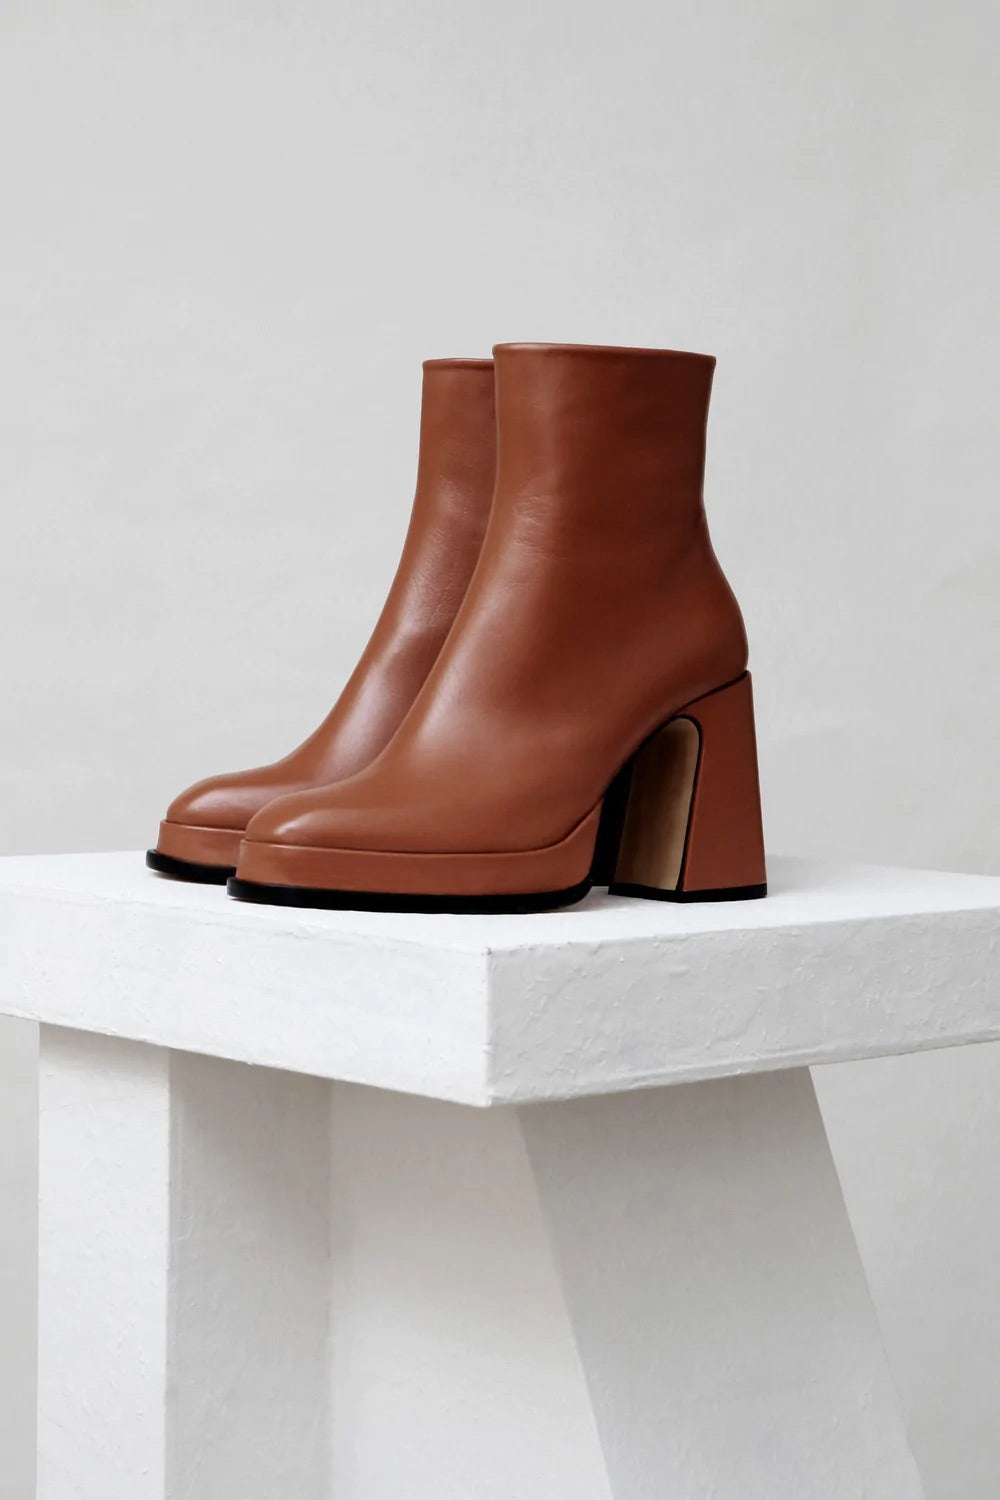 Souliers Martinez- Chueca Calf Leather Boots: Brown